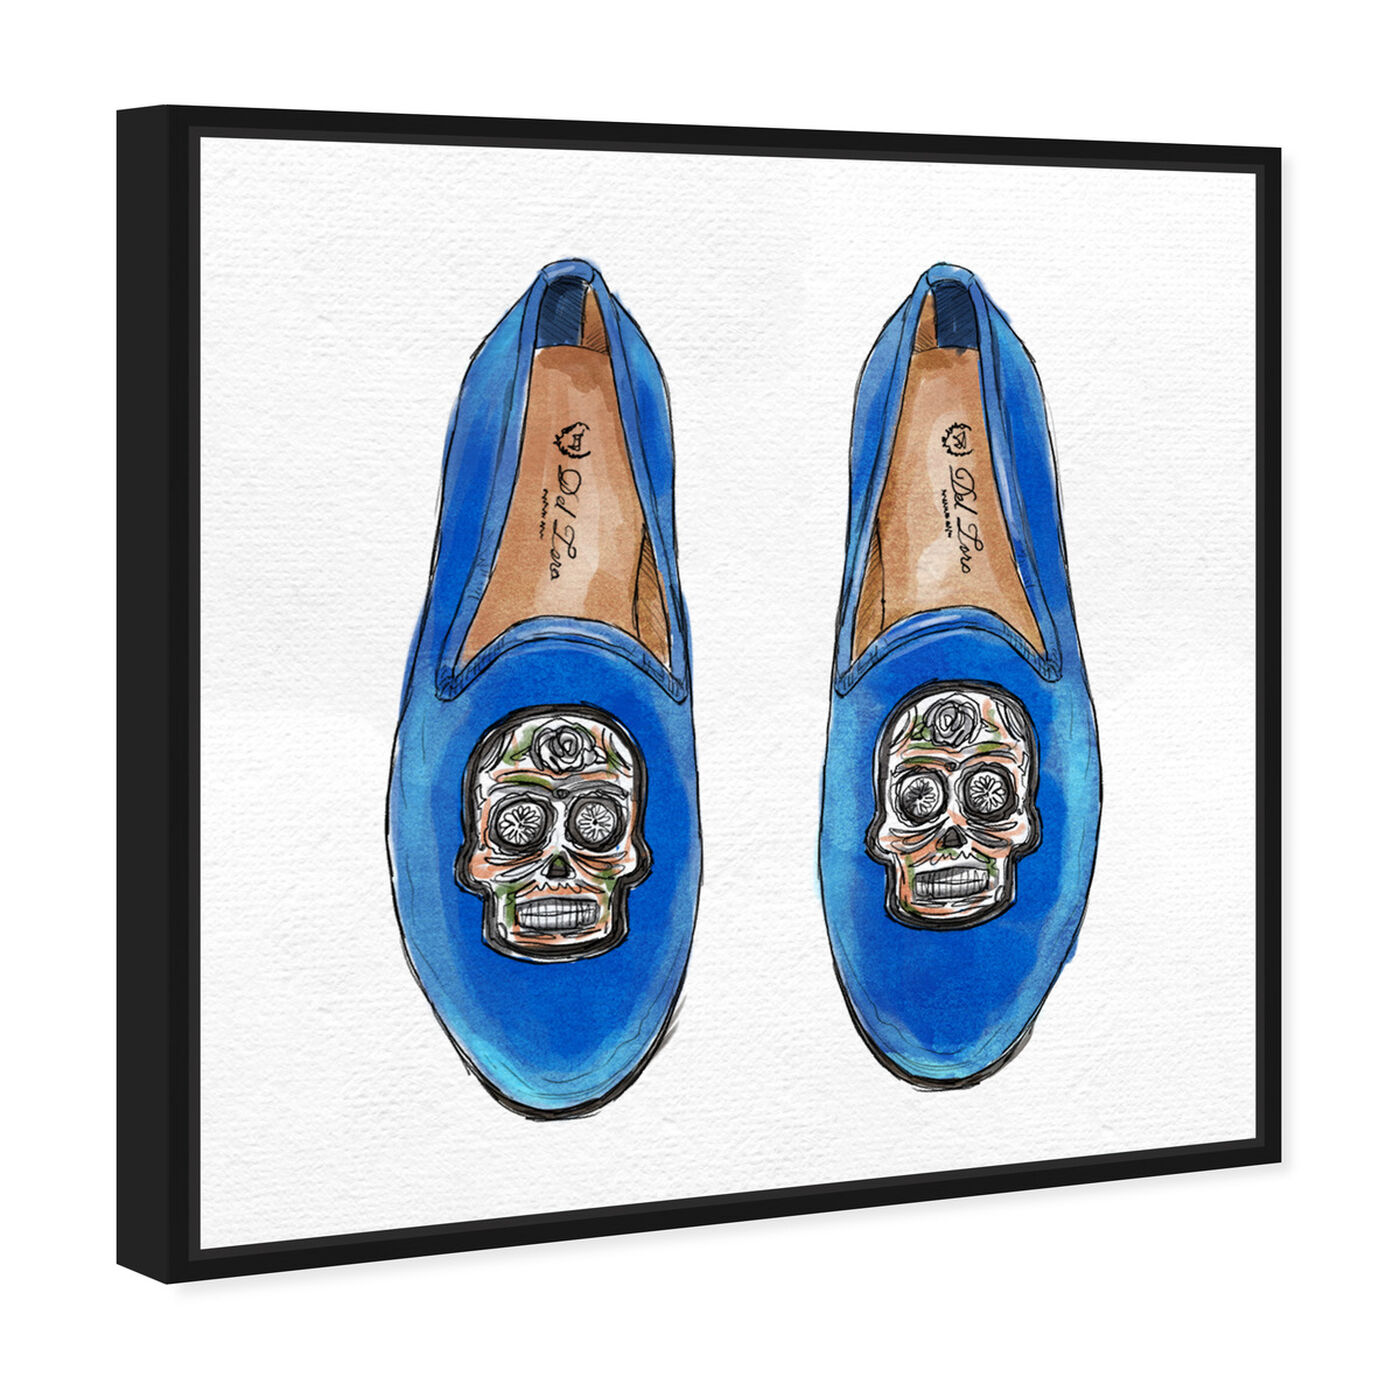 Angled view of Skull Slippers featuring fashion and glam and shoes art.